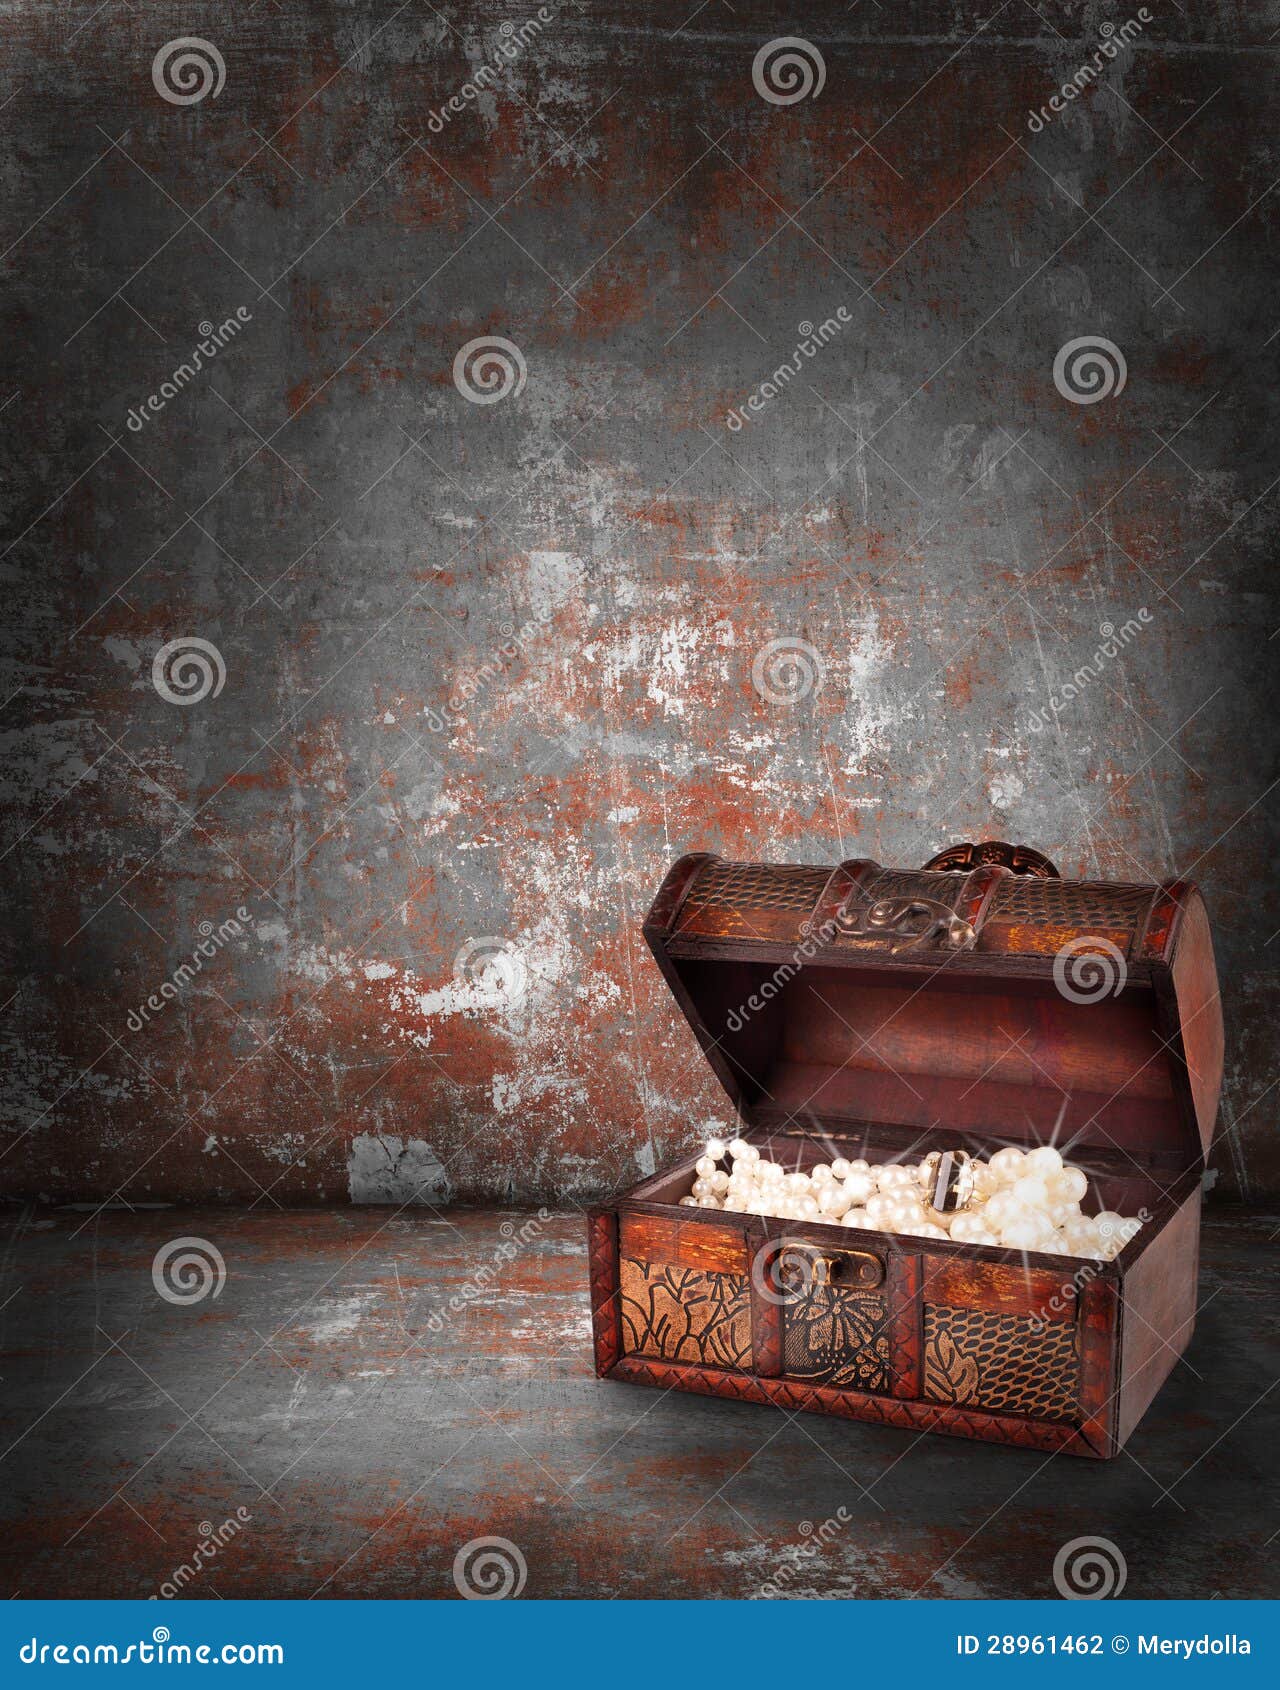 Treasure Chest With Jewelry Inside Stock Photography - Image: 28961462